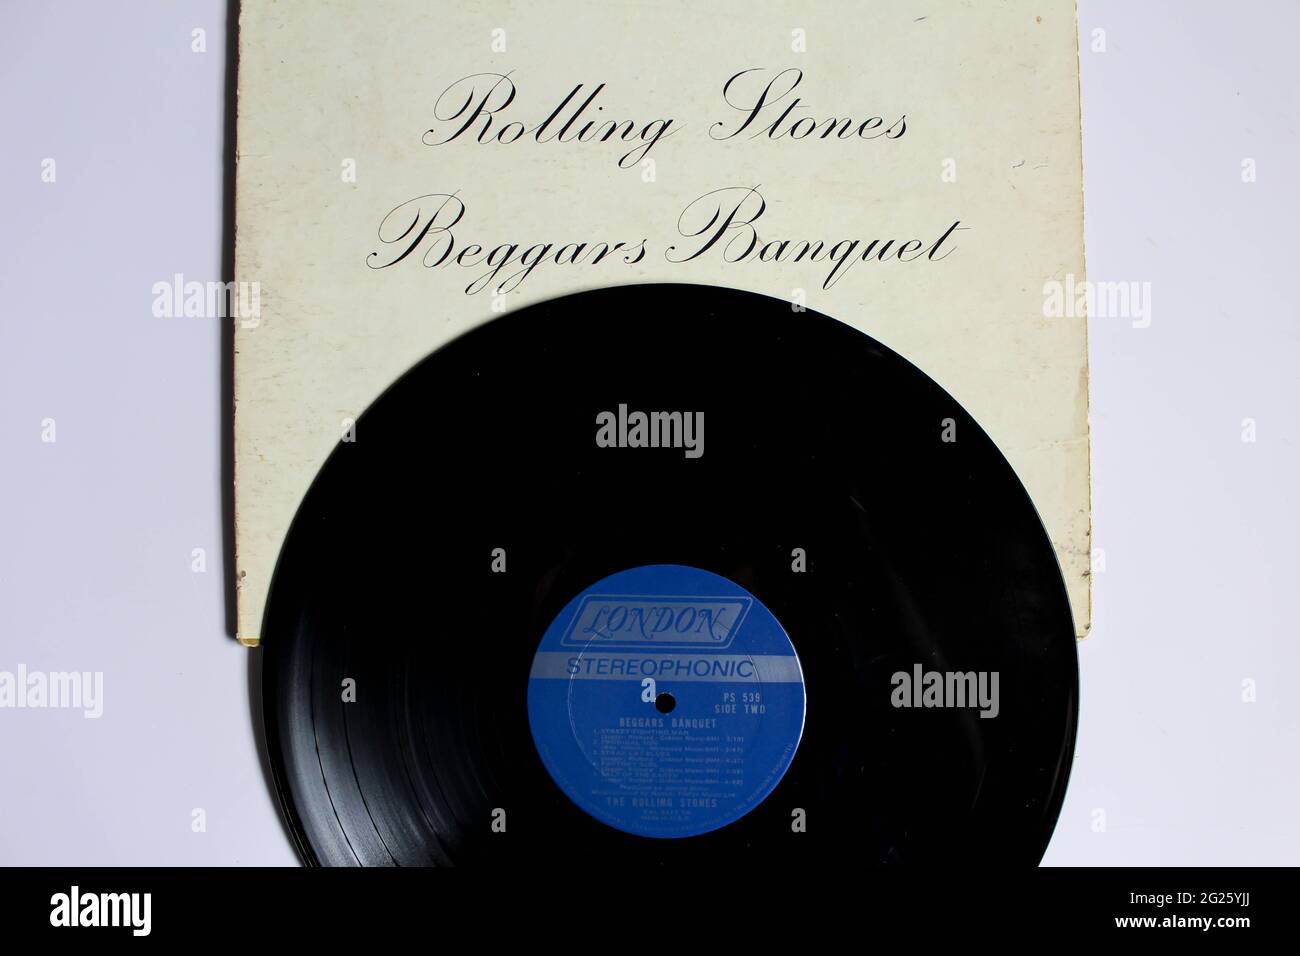 English rock band, The Rolling Stones music album on vinyl record LP disc. Titled: Beggars Banquet album cover Stock Photo